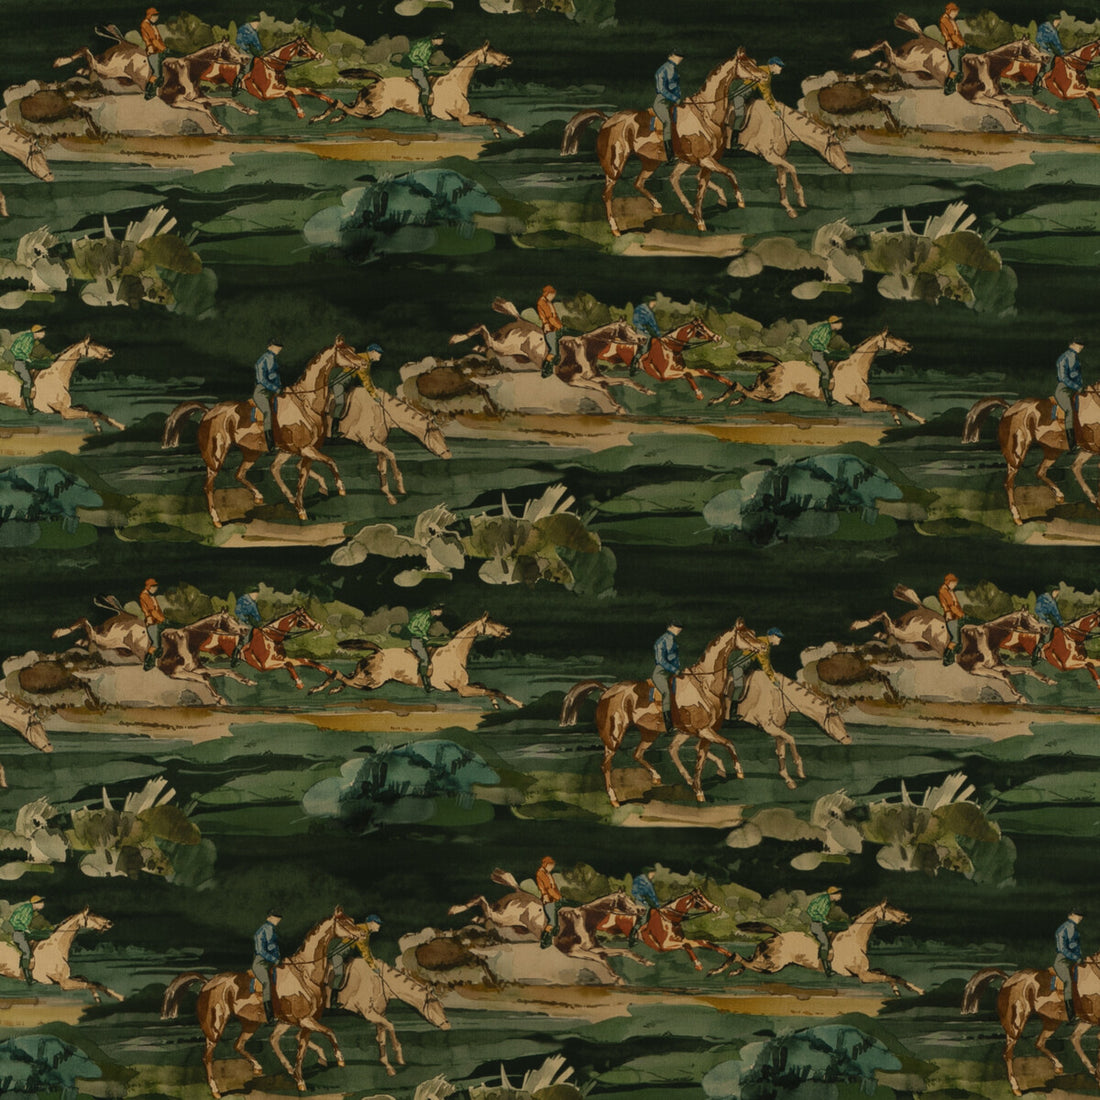 Morning Gallop Velvet fabric in teal color - pattern FD295.R11.0 - by Mulberry in the Icons Fabrics collection